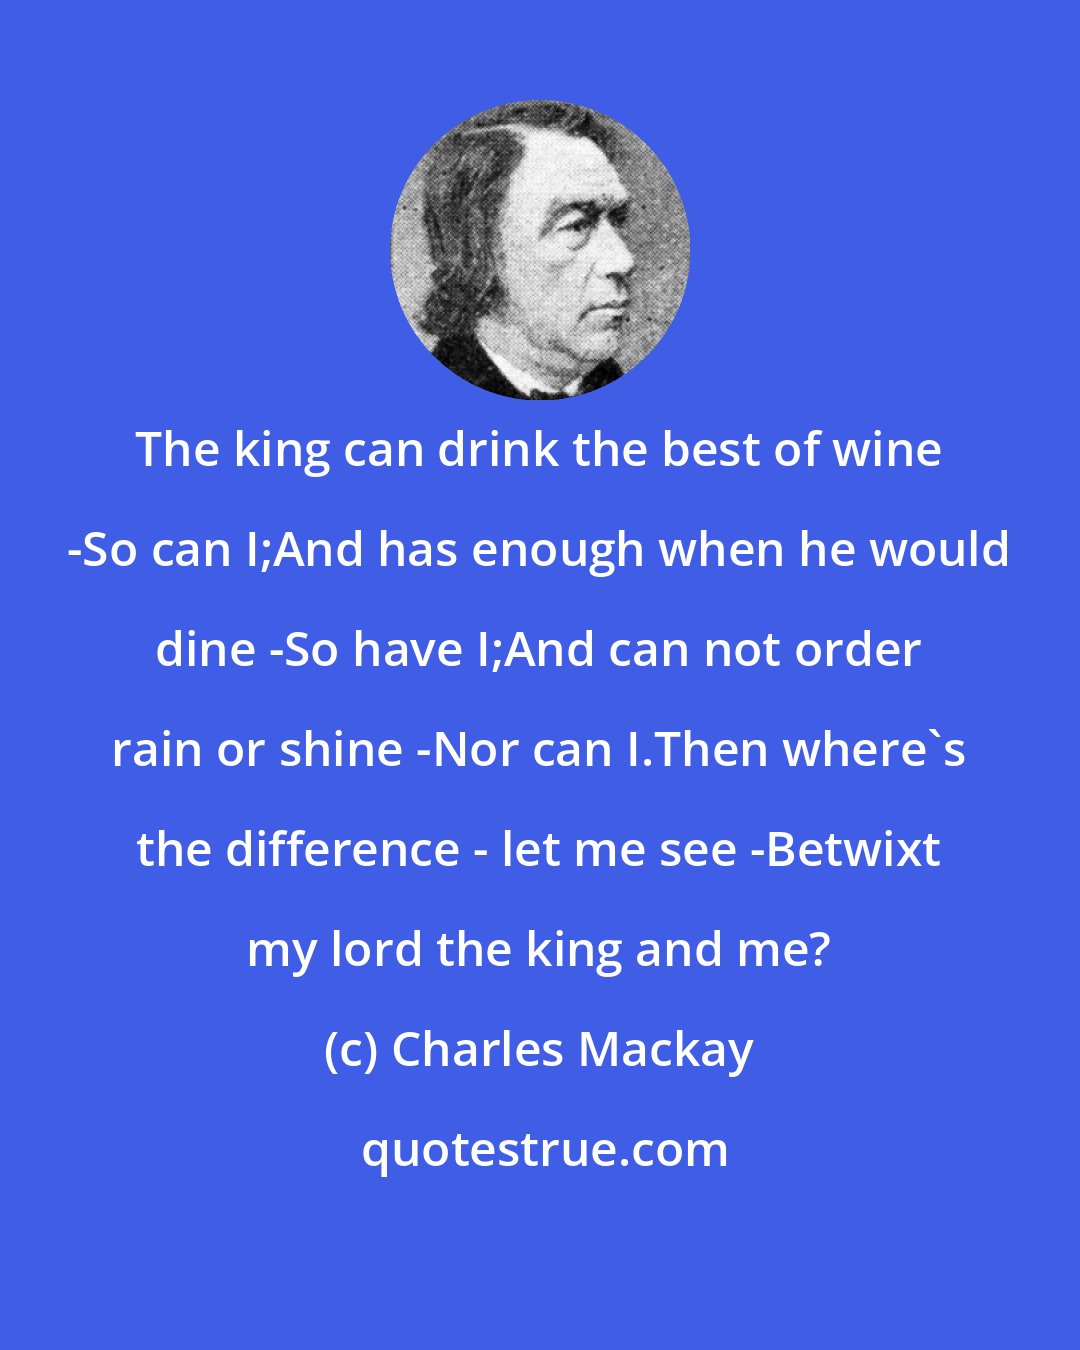 Charles Mackay: The king can drink the best of wine -So can I;And has enough when he would dine -So have I;And can not order rain or shine -Nor can I.Then where's the difference - let me see -Betwixt my lord the king and me?